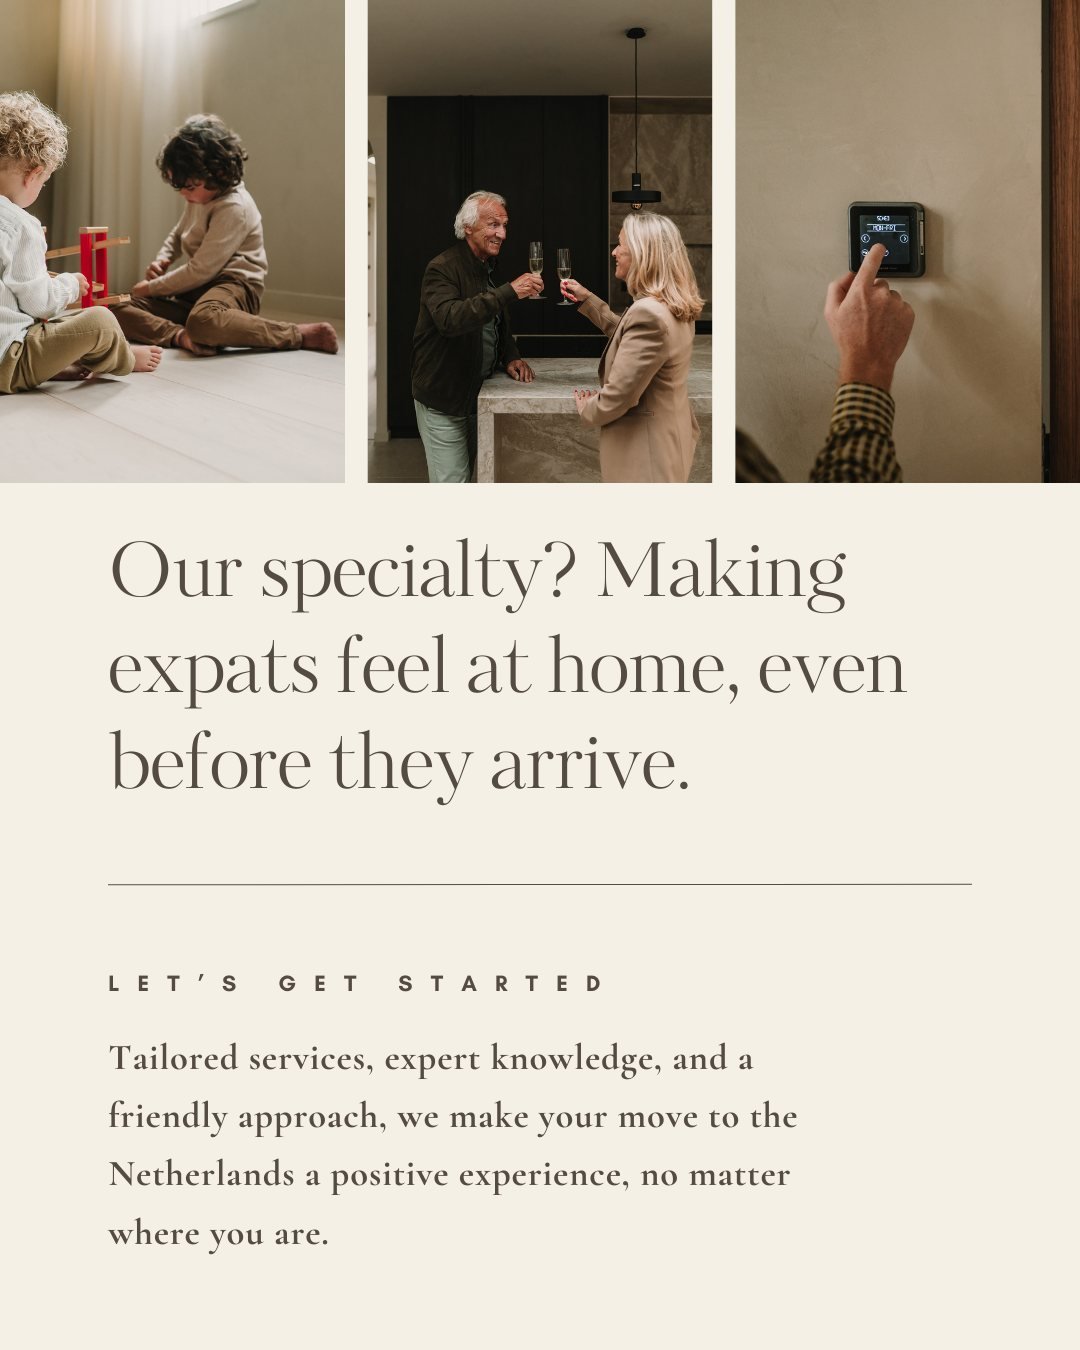 Great Expatation: Your Partner in Relocation. Experience a seamless transition to your new home with our personalized services. From finding the perfect neighborhood to settling in smoothly, we've got you covered. 

Let us take the stress out of your